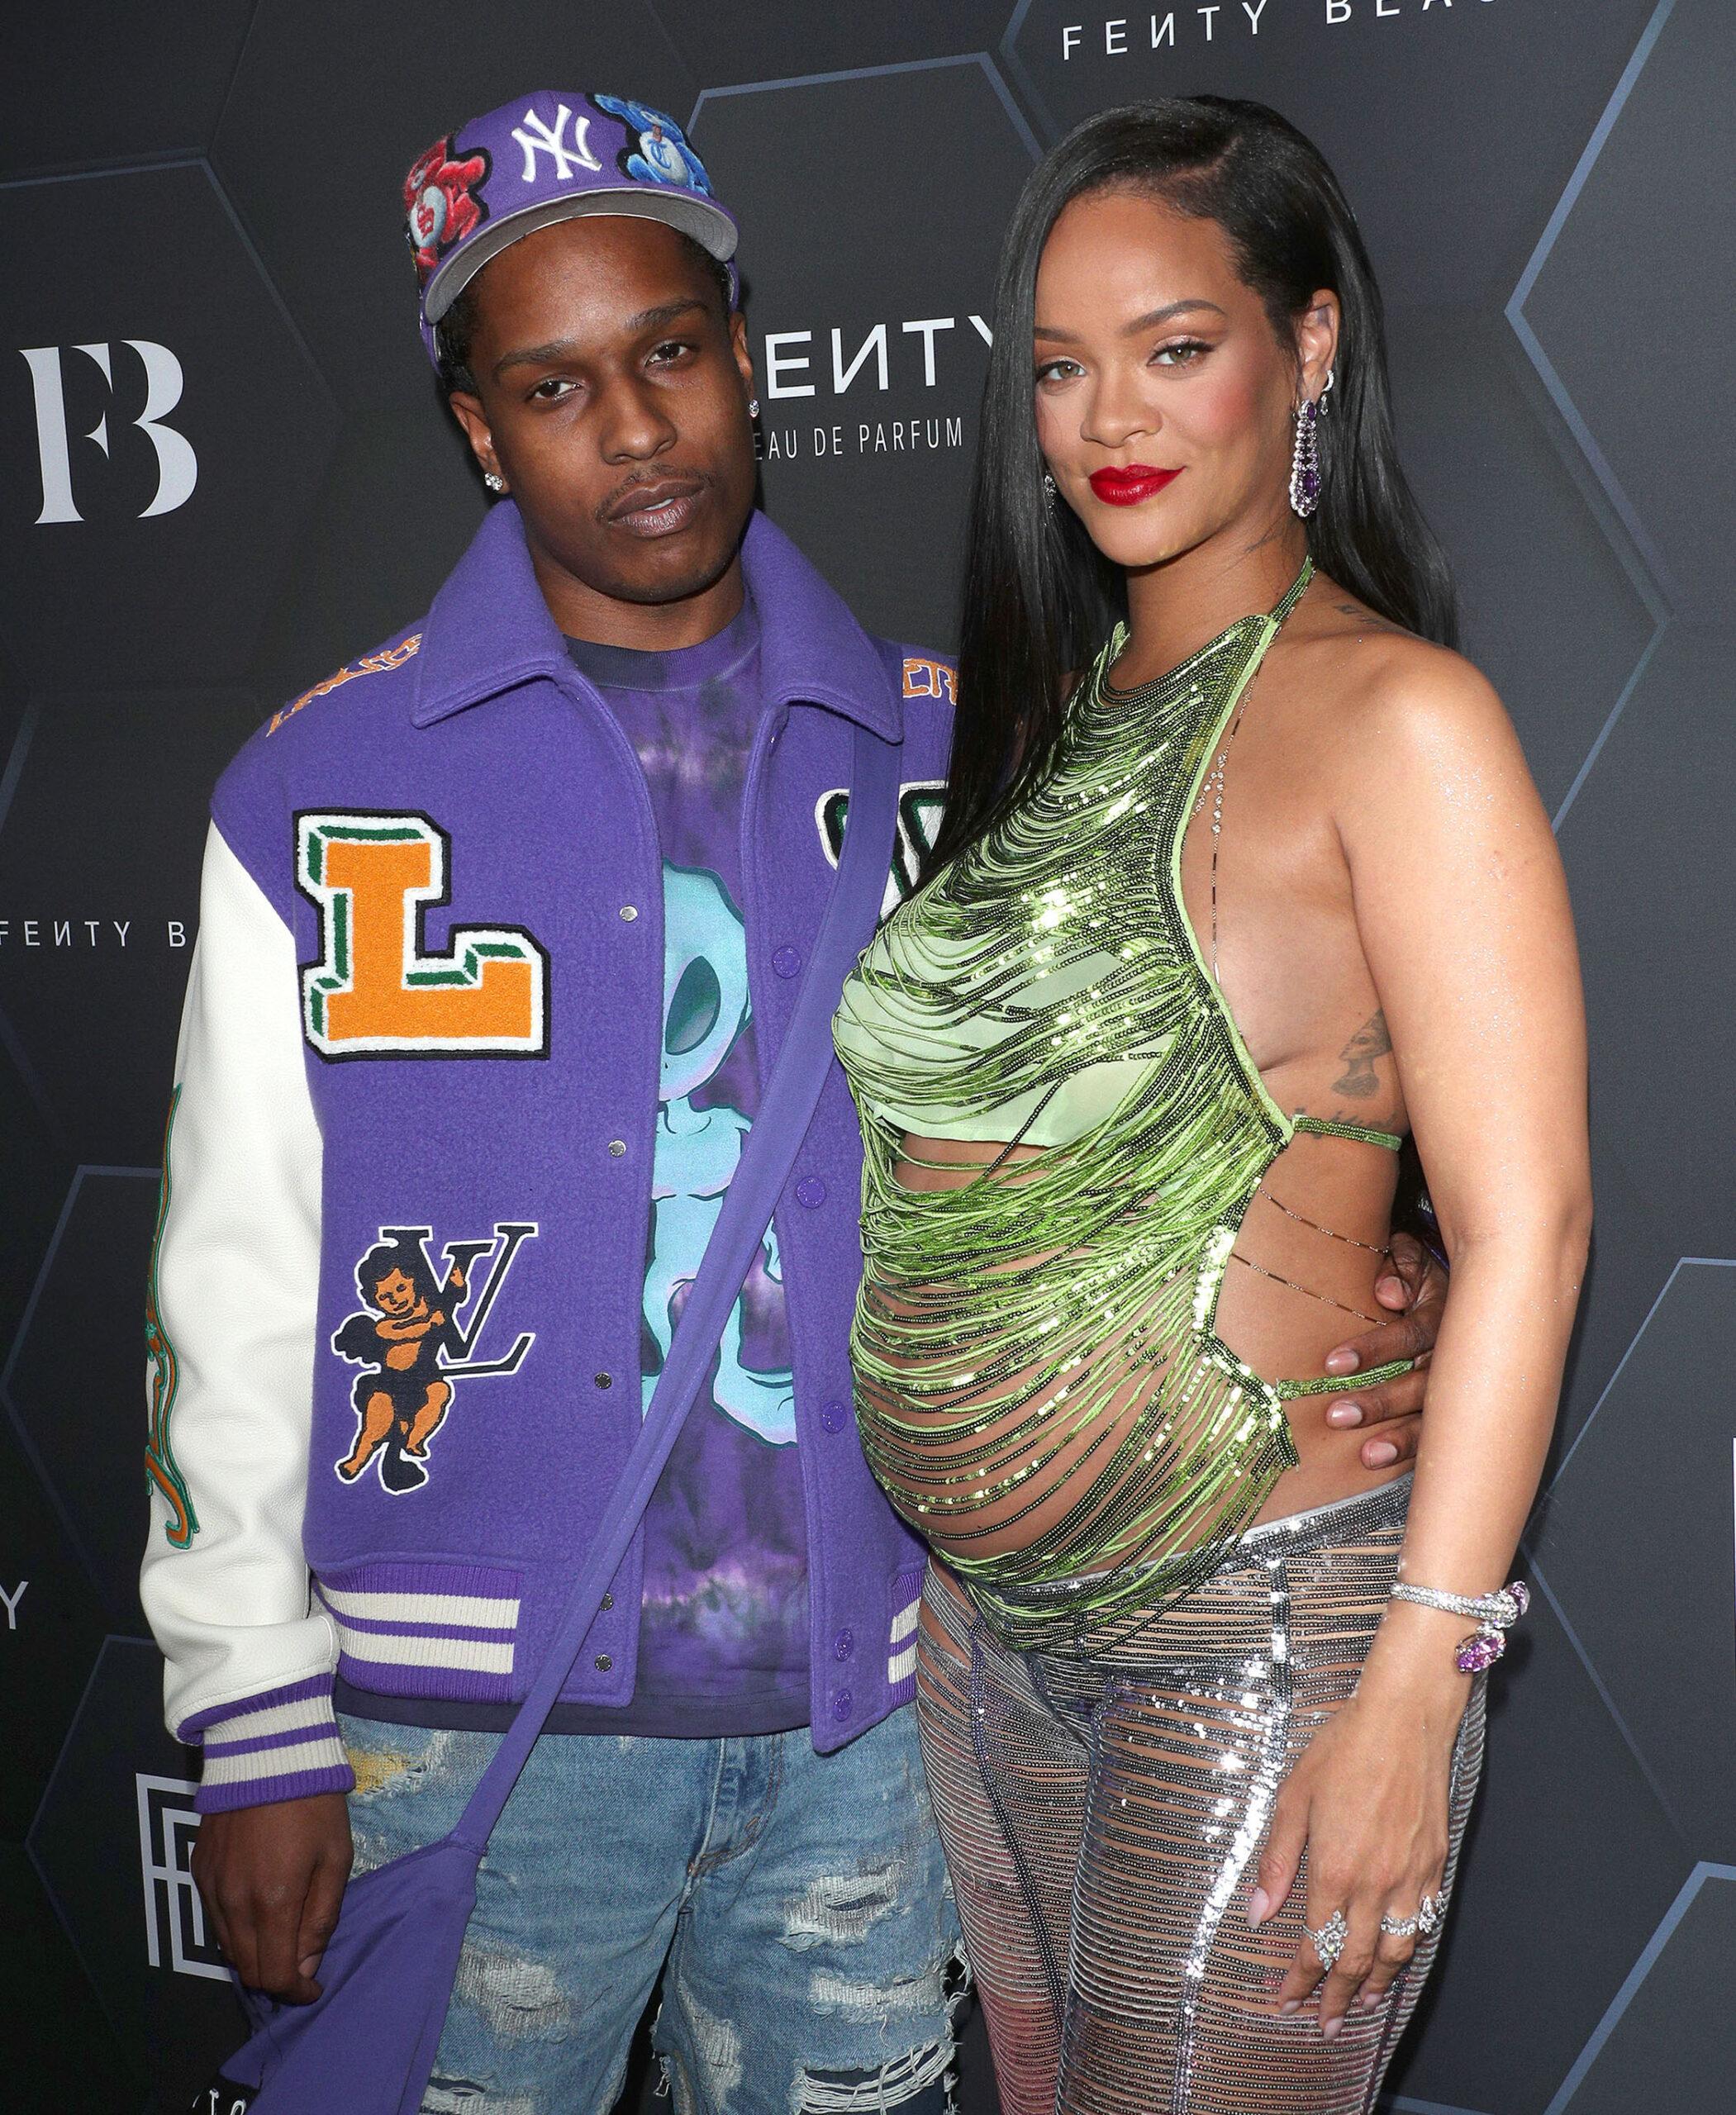 Rihanna didn't consult A$AP Rocky on Savage X Fenty for men